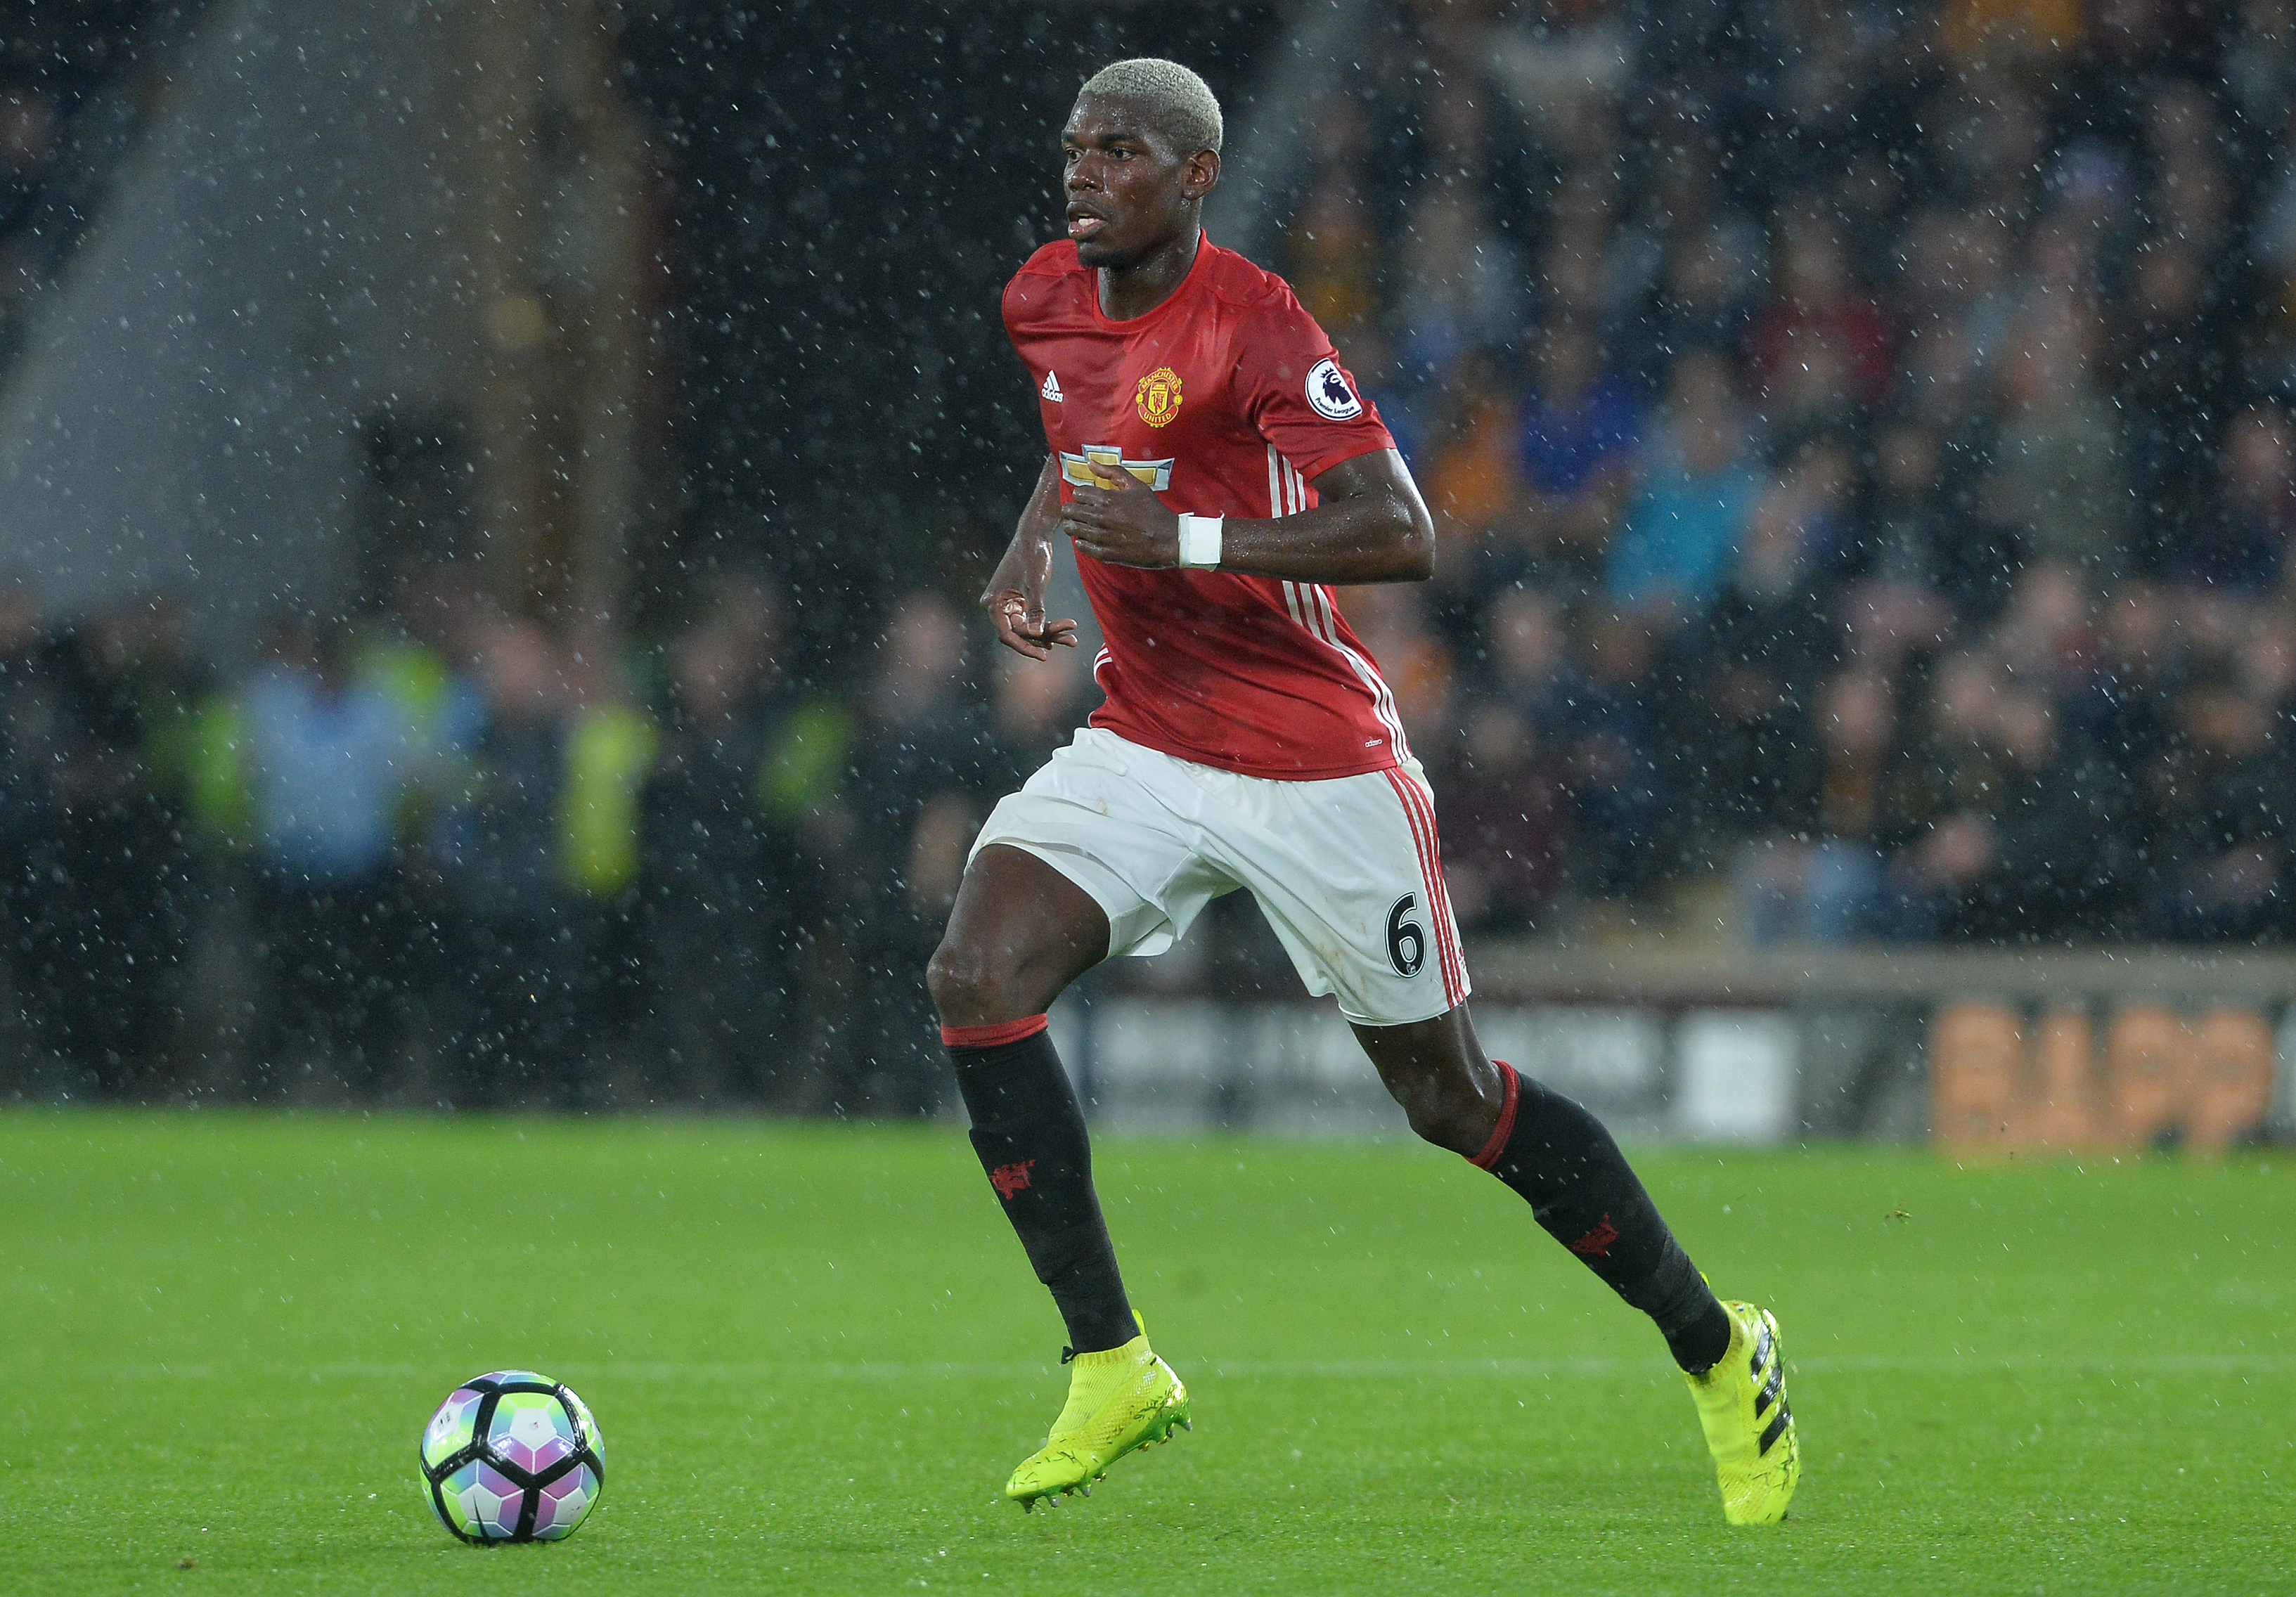 It's great to have Paul Pogba in the side once again, exclaims Luke Shaw